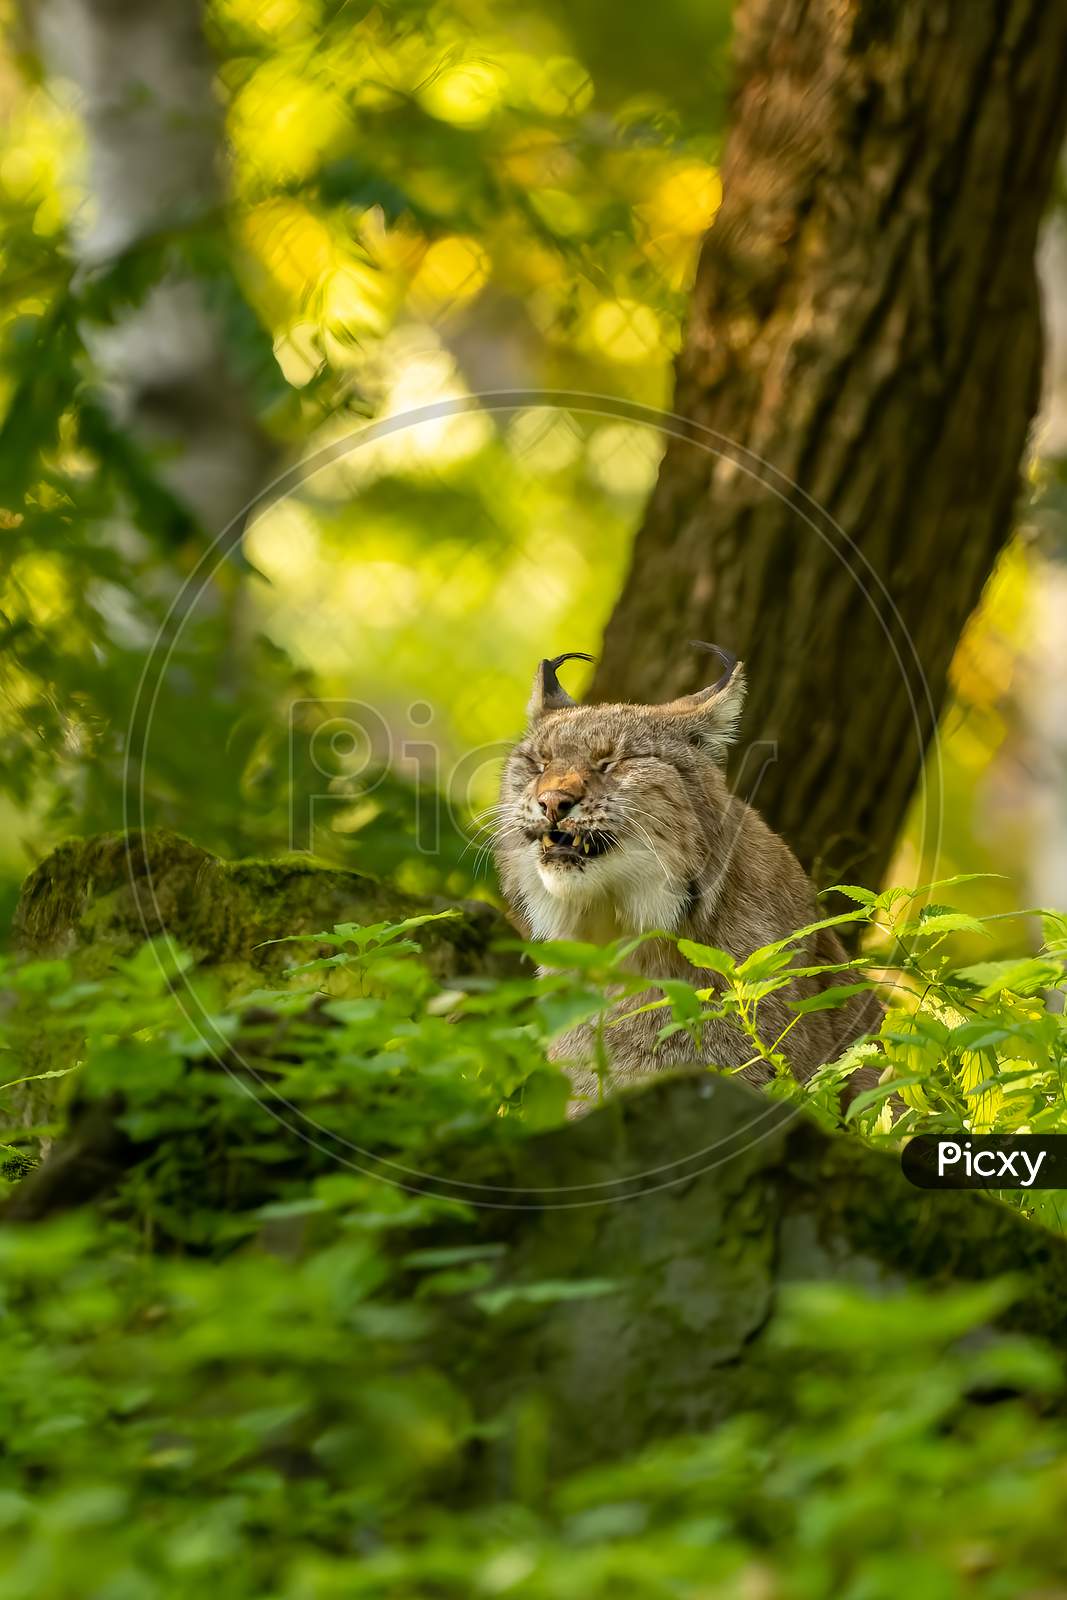 A beautiful lynx (bobcat) walking through a forest in a natural reserve in Germany at a sunny day in summer.